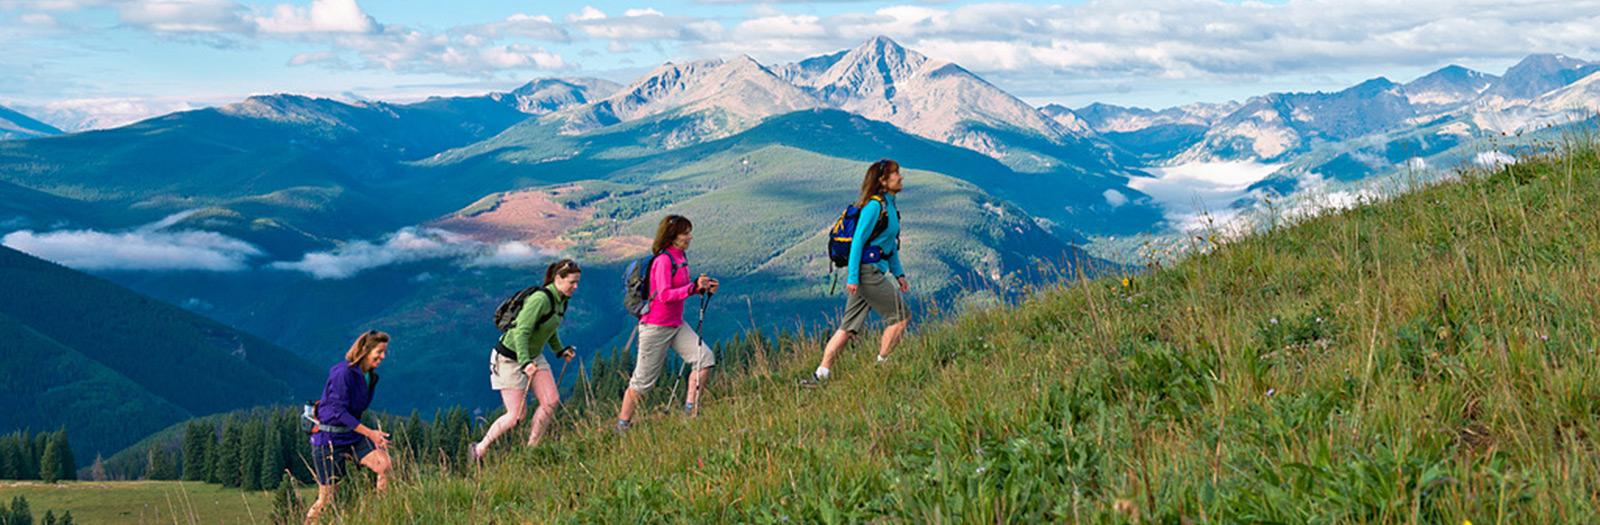 Hiking Happiness: Do Seasons and Hours Matter When Exploring Nature’s Wonders?